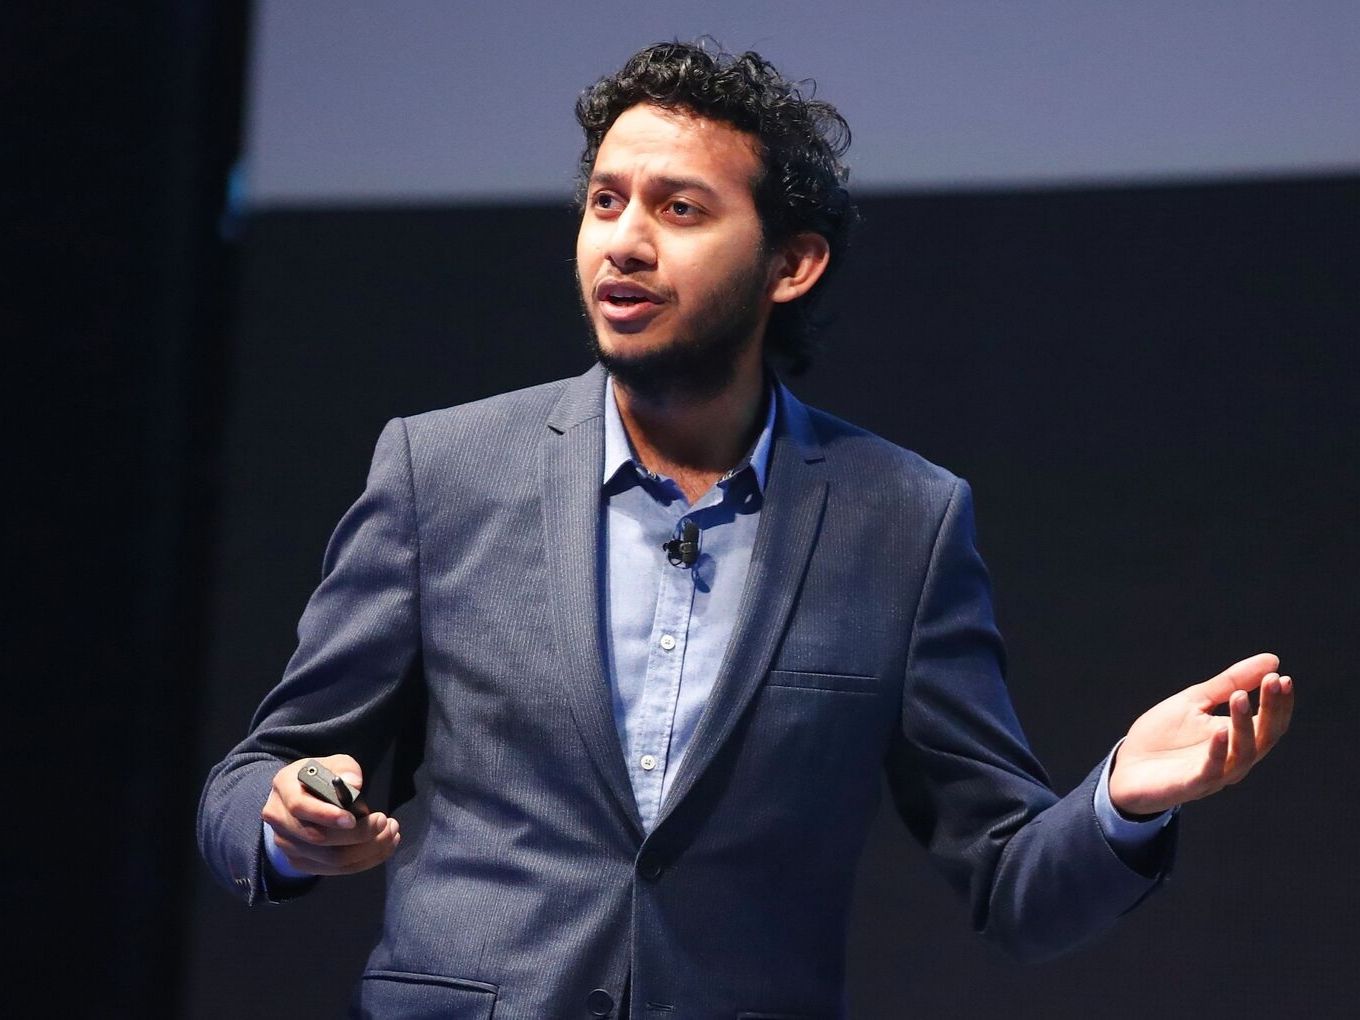 OYO’s Ritesh Agarwal To Buy Back $1.5 Bn Worth Shares From Sequoia, Lightspeed